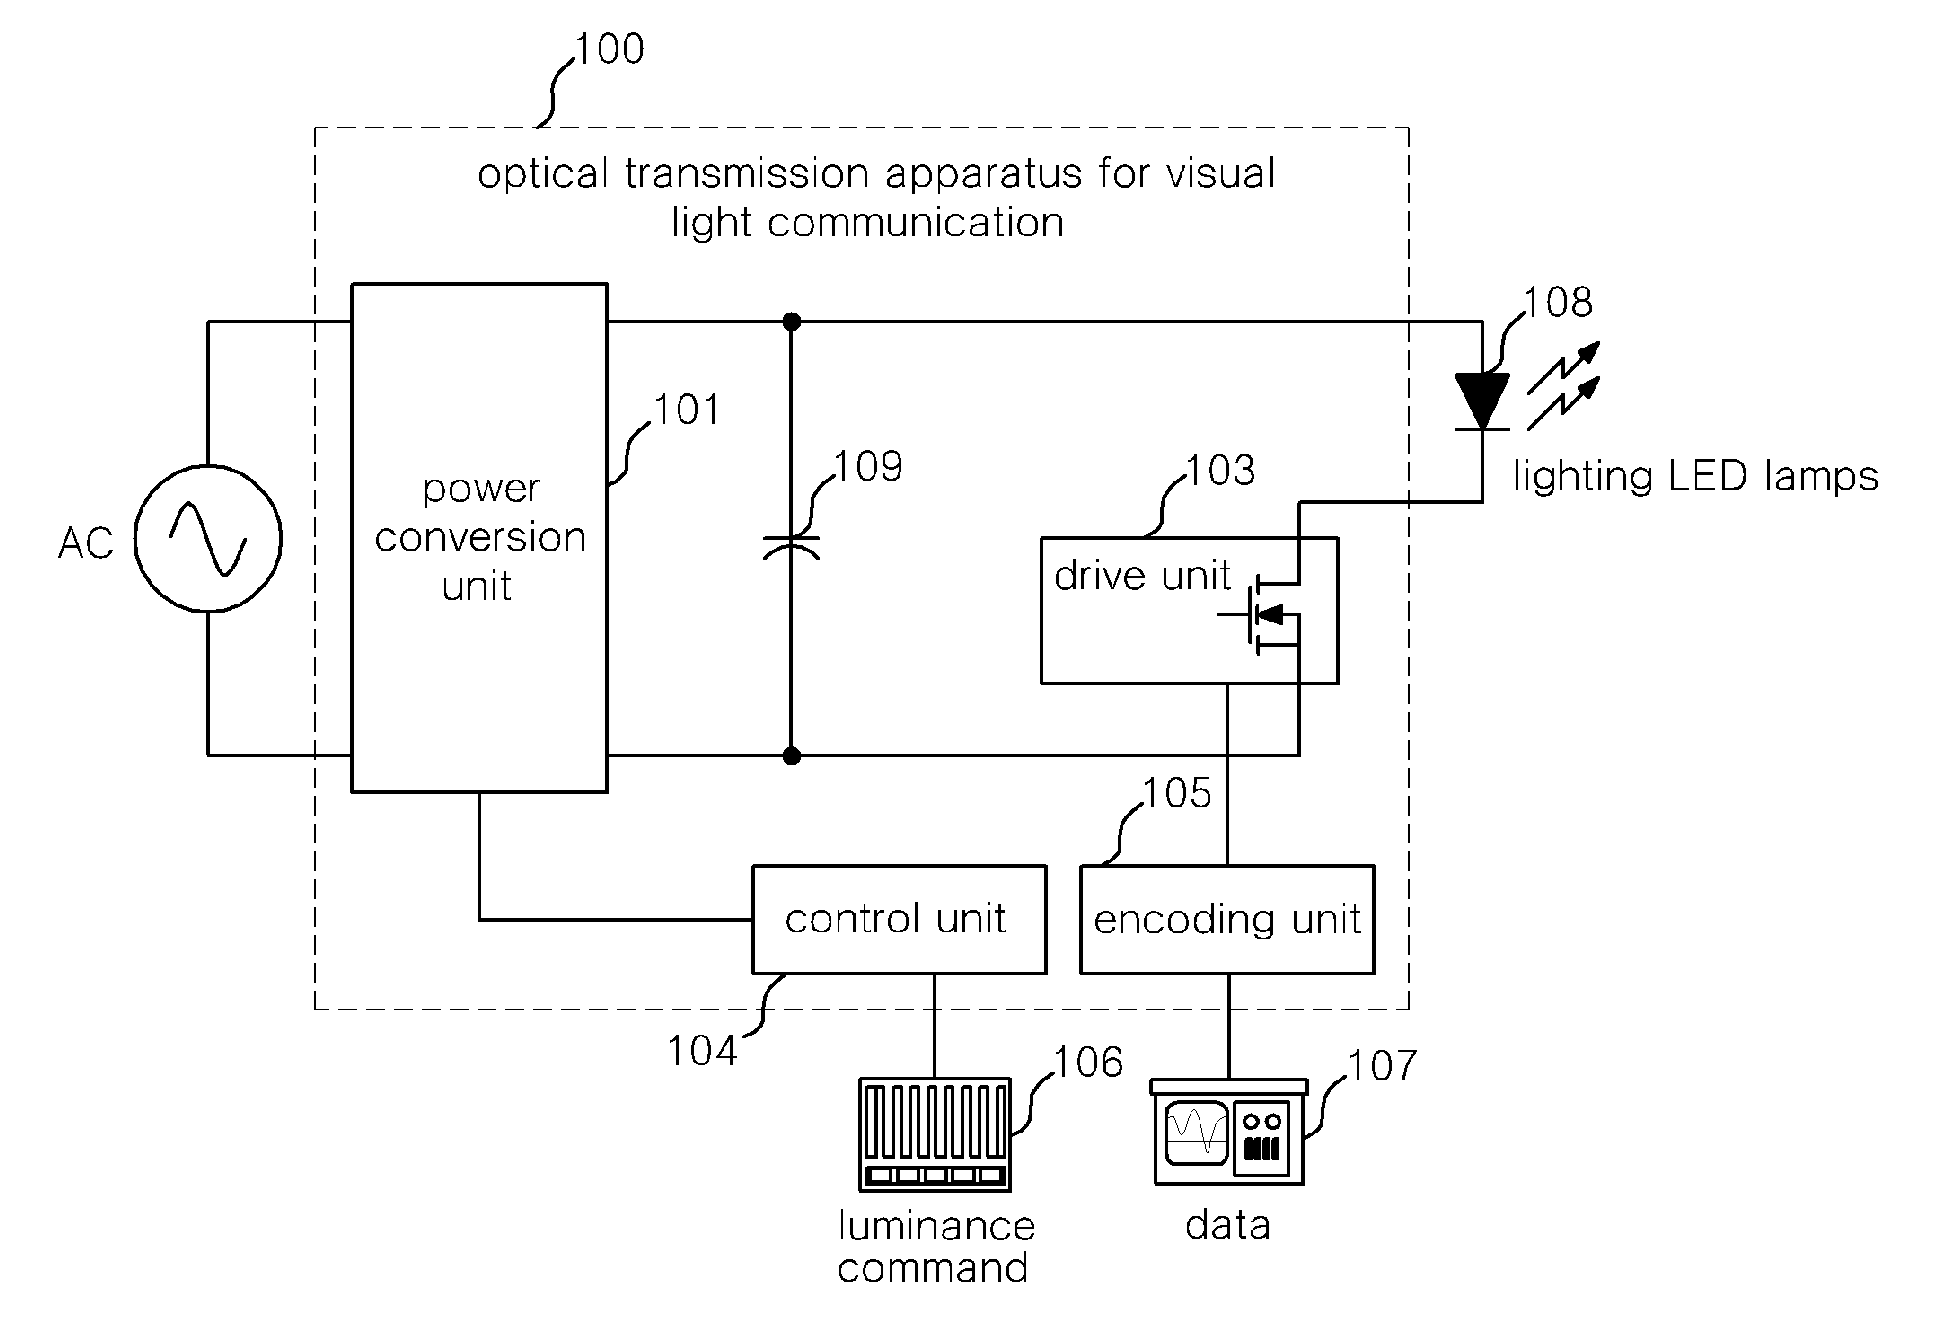 Optical transmission apparatus for visible light communication